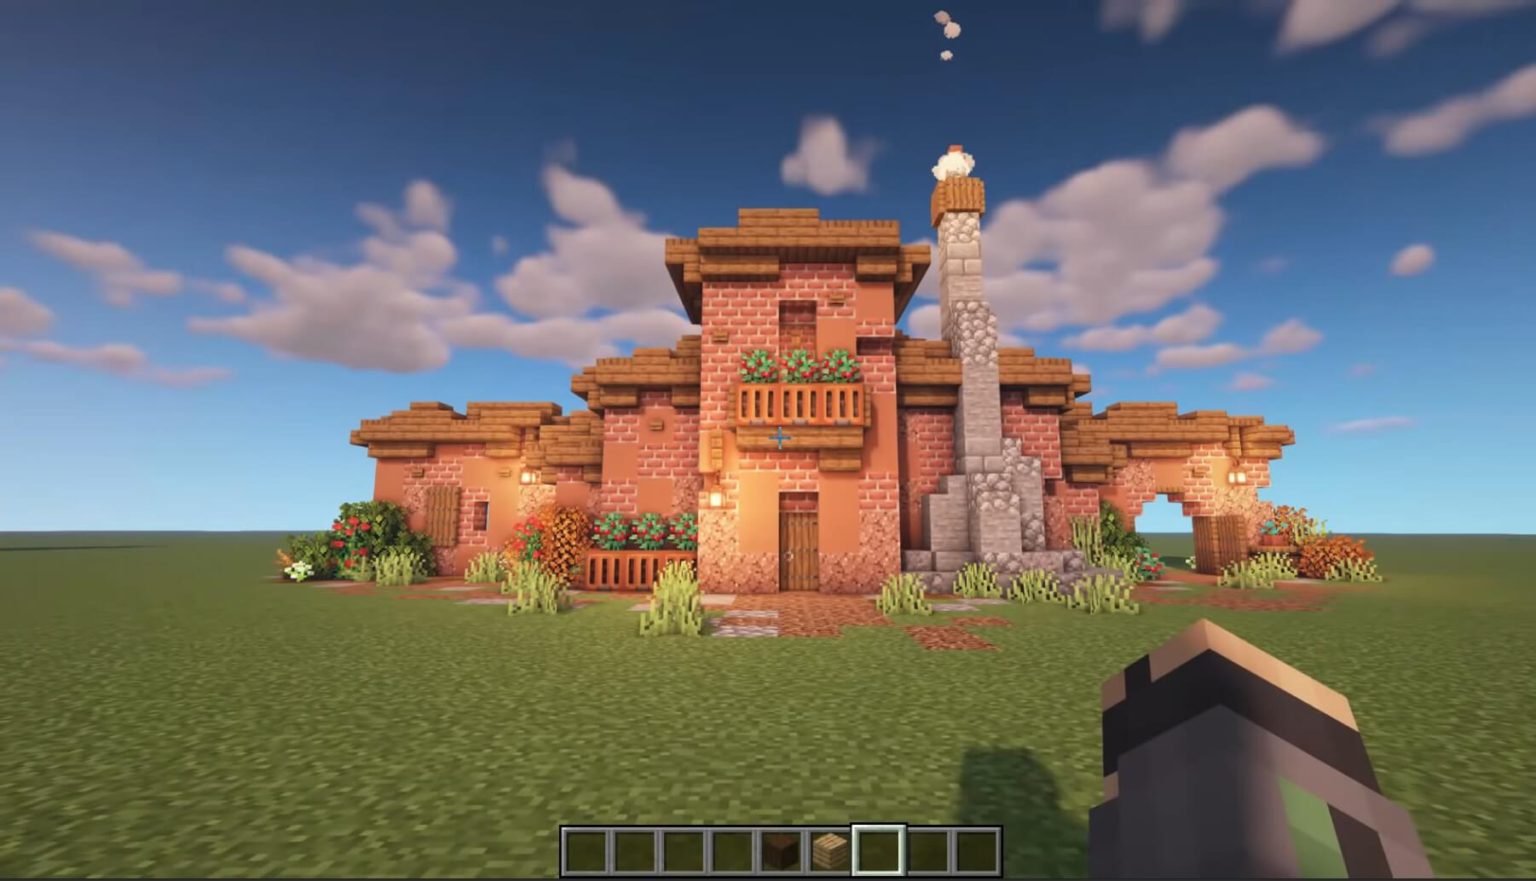 50 Awesome Minecraft Builds To Get Yourself Inspired â Minecraft ...